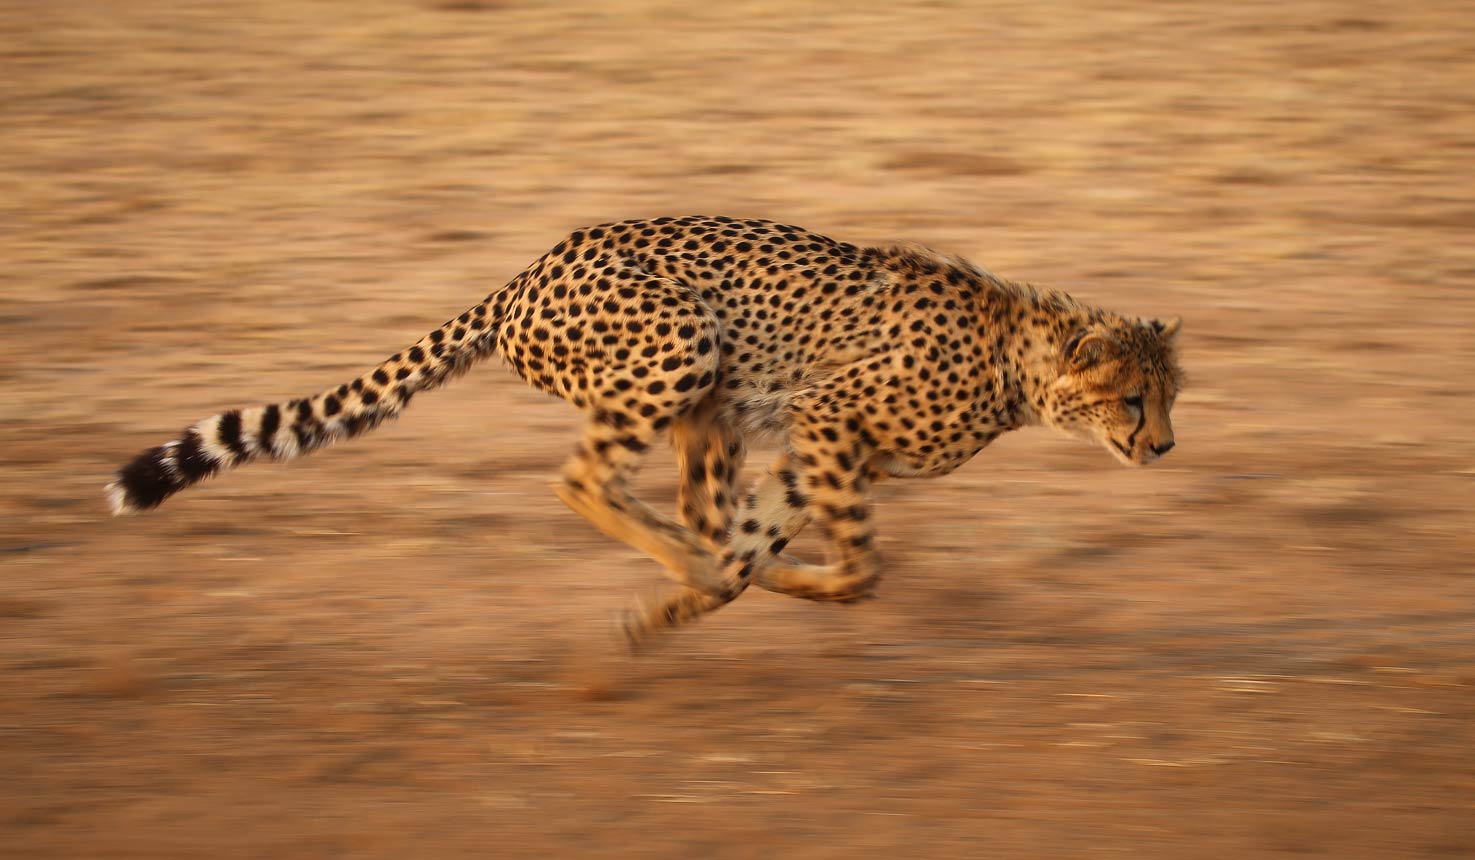 The best locations for Cheetahs with Africa Travel Resource